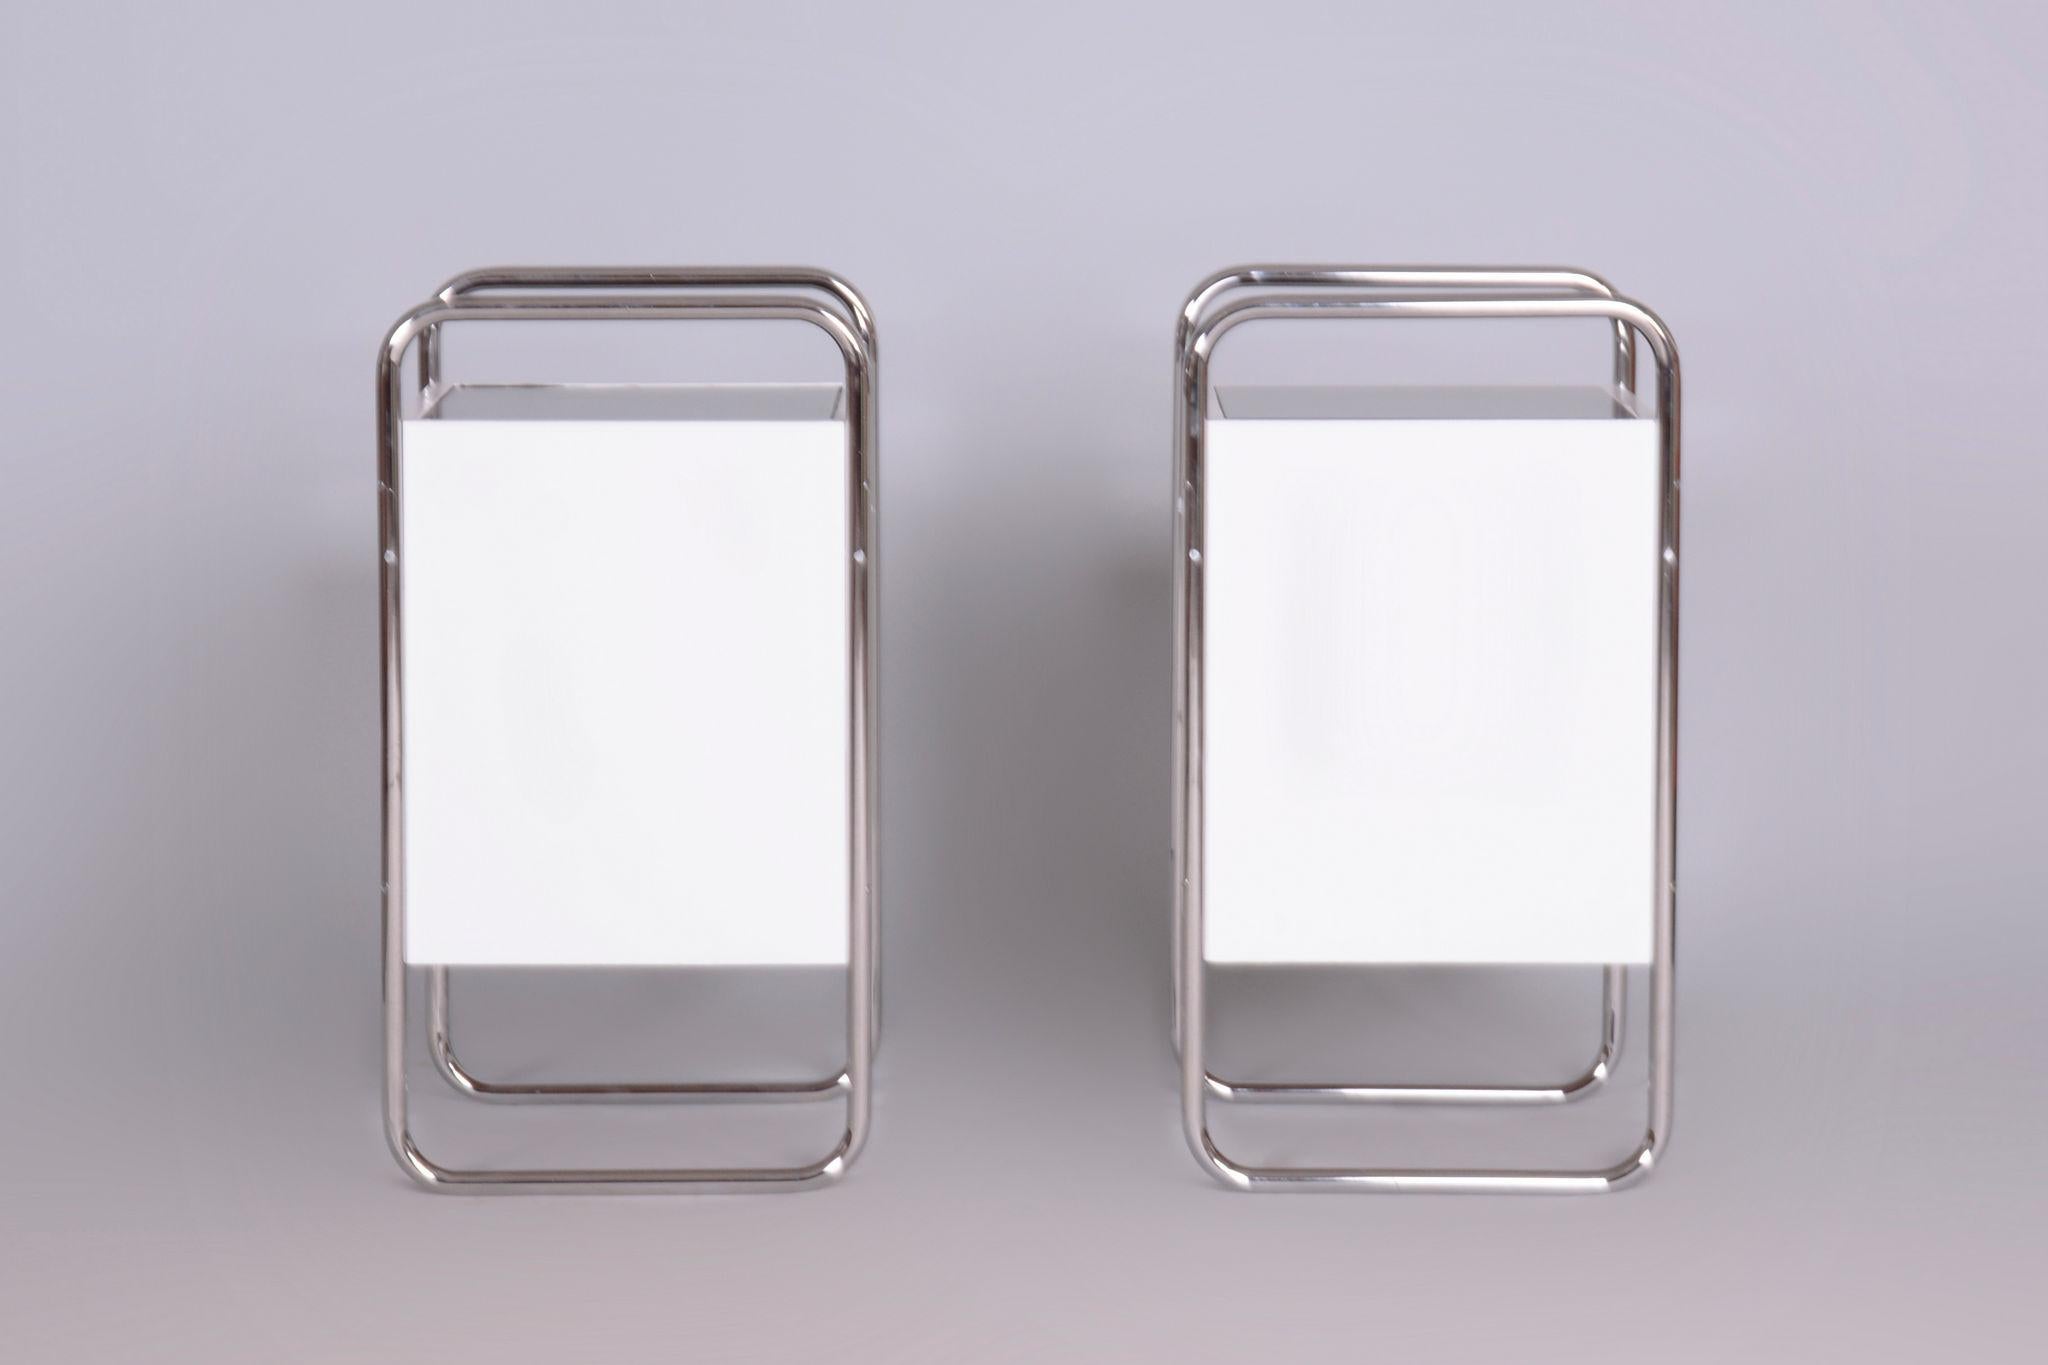 Steel Restored Bauhaus Pair of Bedside Tables, Vichr a spol, Chrome, Czechia, 1930s For Sale